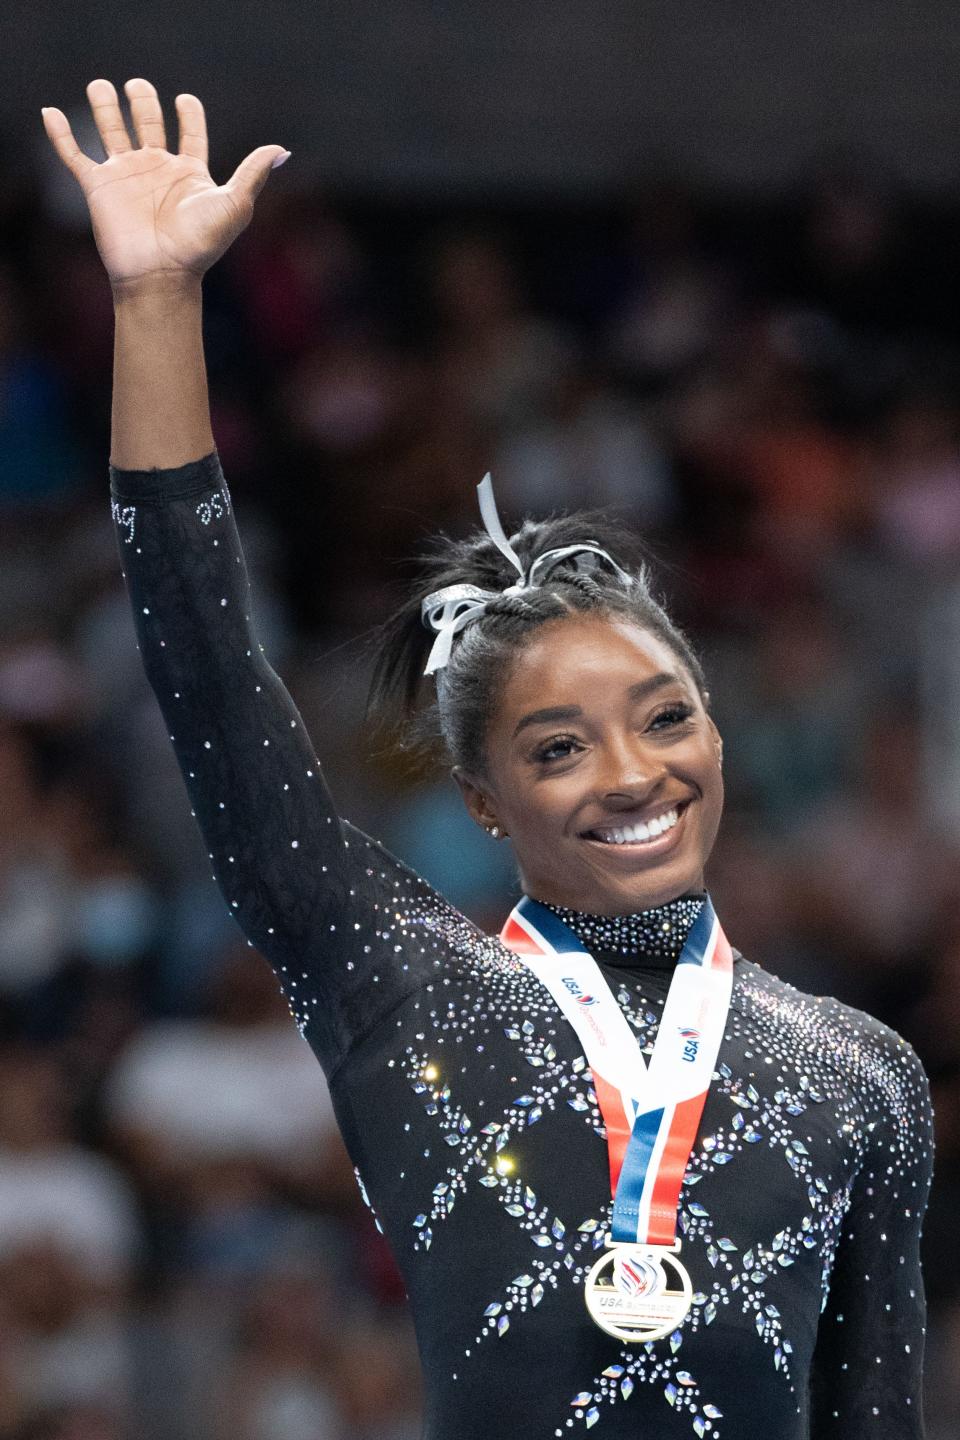 Simone Biles seeks to add to her collection of seven Olympic medals (four gold).